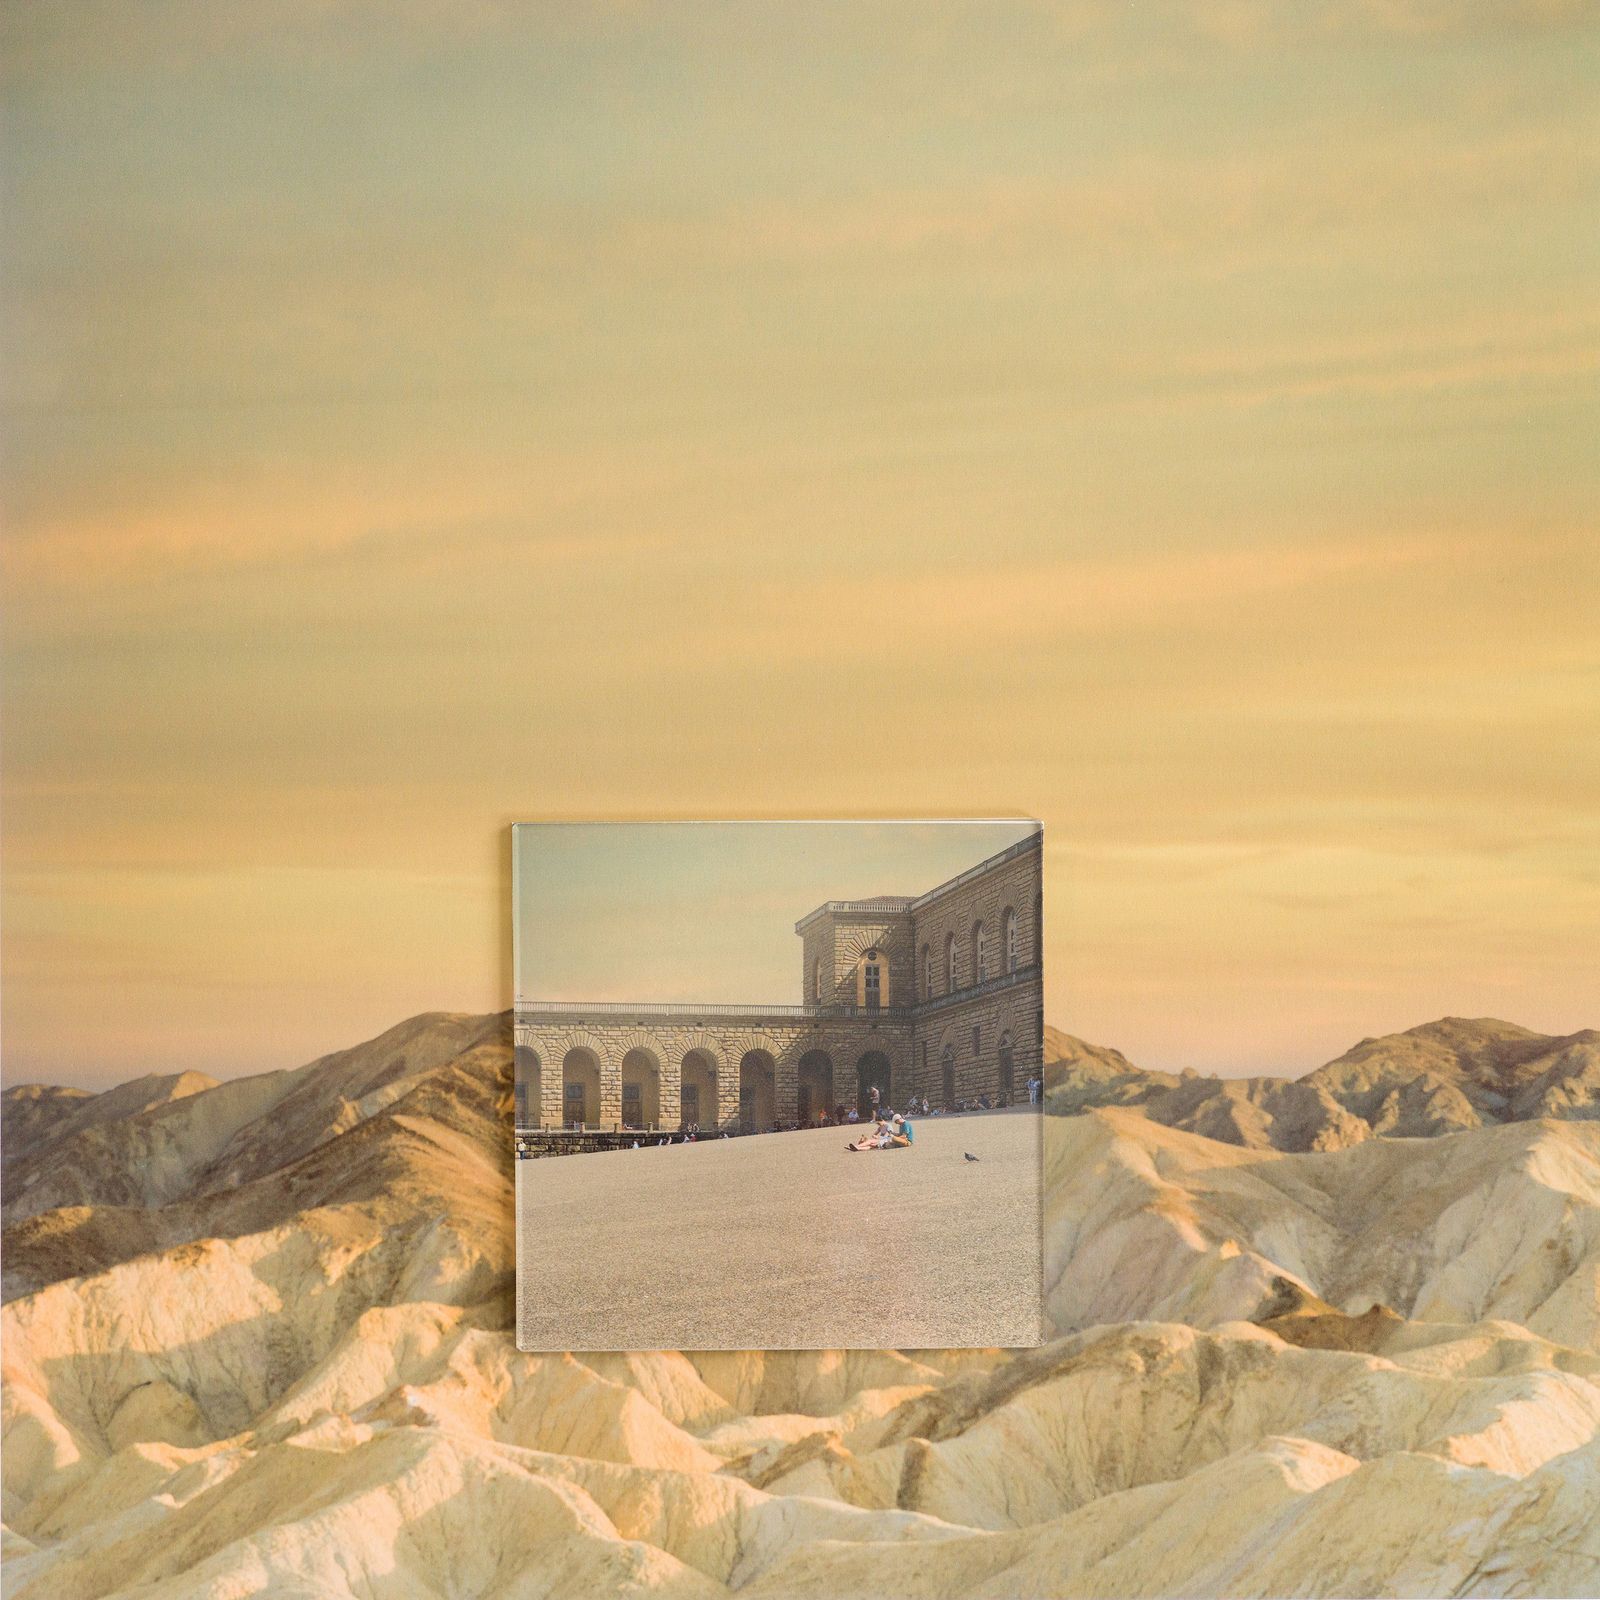 © Diana Cheren Nygren - Solar Flares Image with mounted acrylic inset. Landscape - Death Valley. Inset - Florence Italy